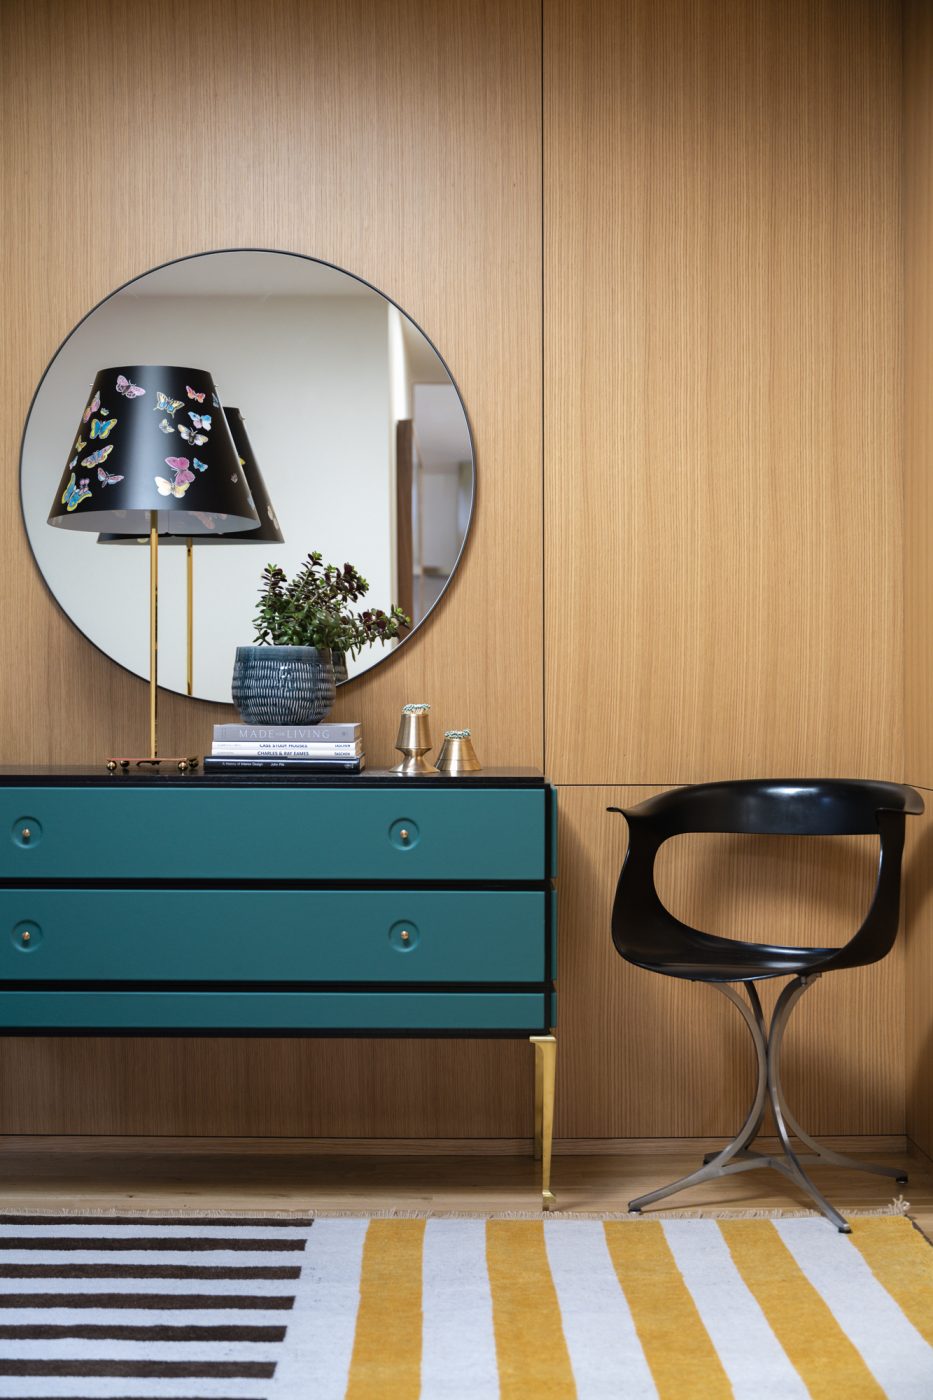 The anteroom of a mid-century-modern home designed by Susan Yeley